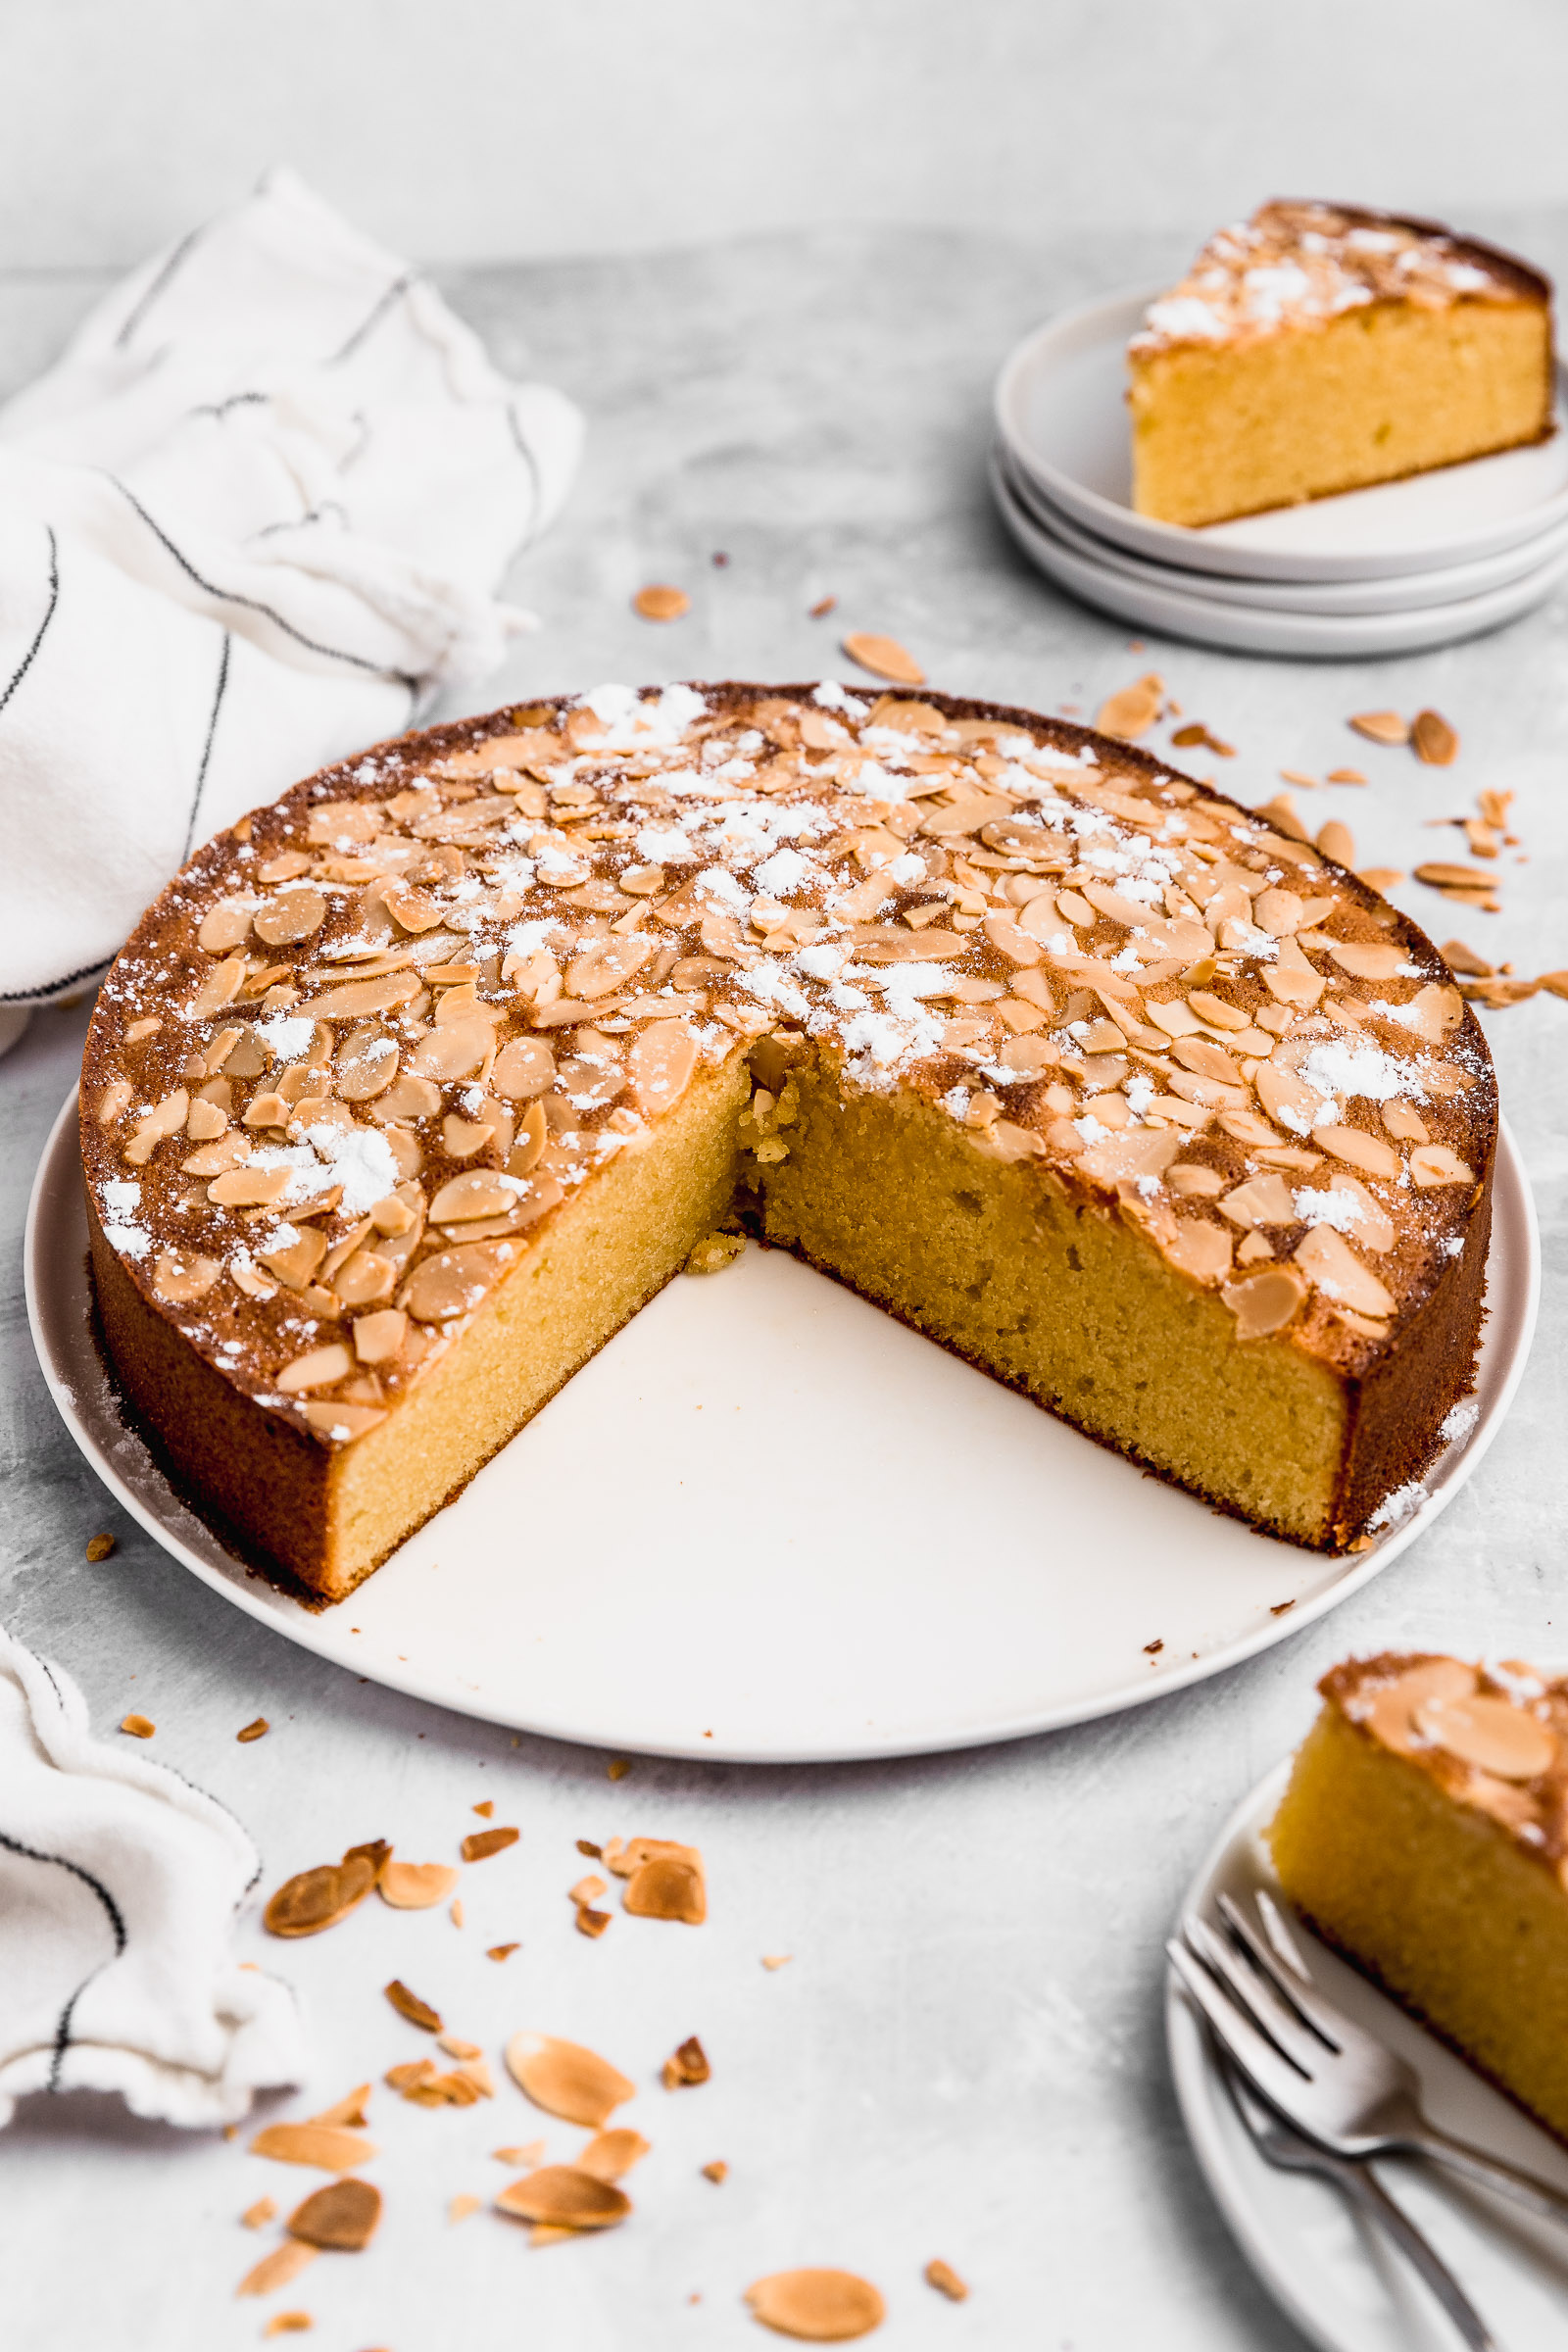 Front view of an almond cake (gluten-free) with toasted sliced almonds on top and icing sugar. Two pieces have been taken so that you can see the moist interior.